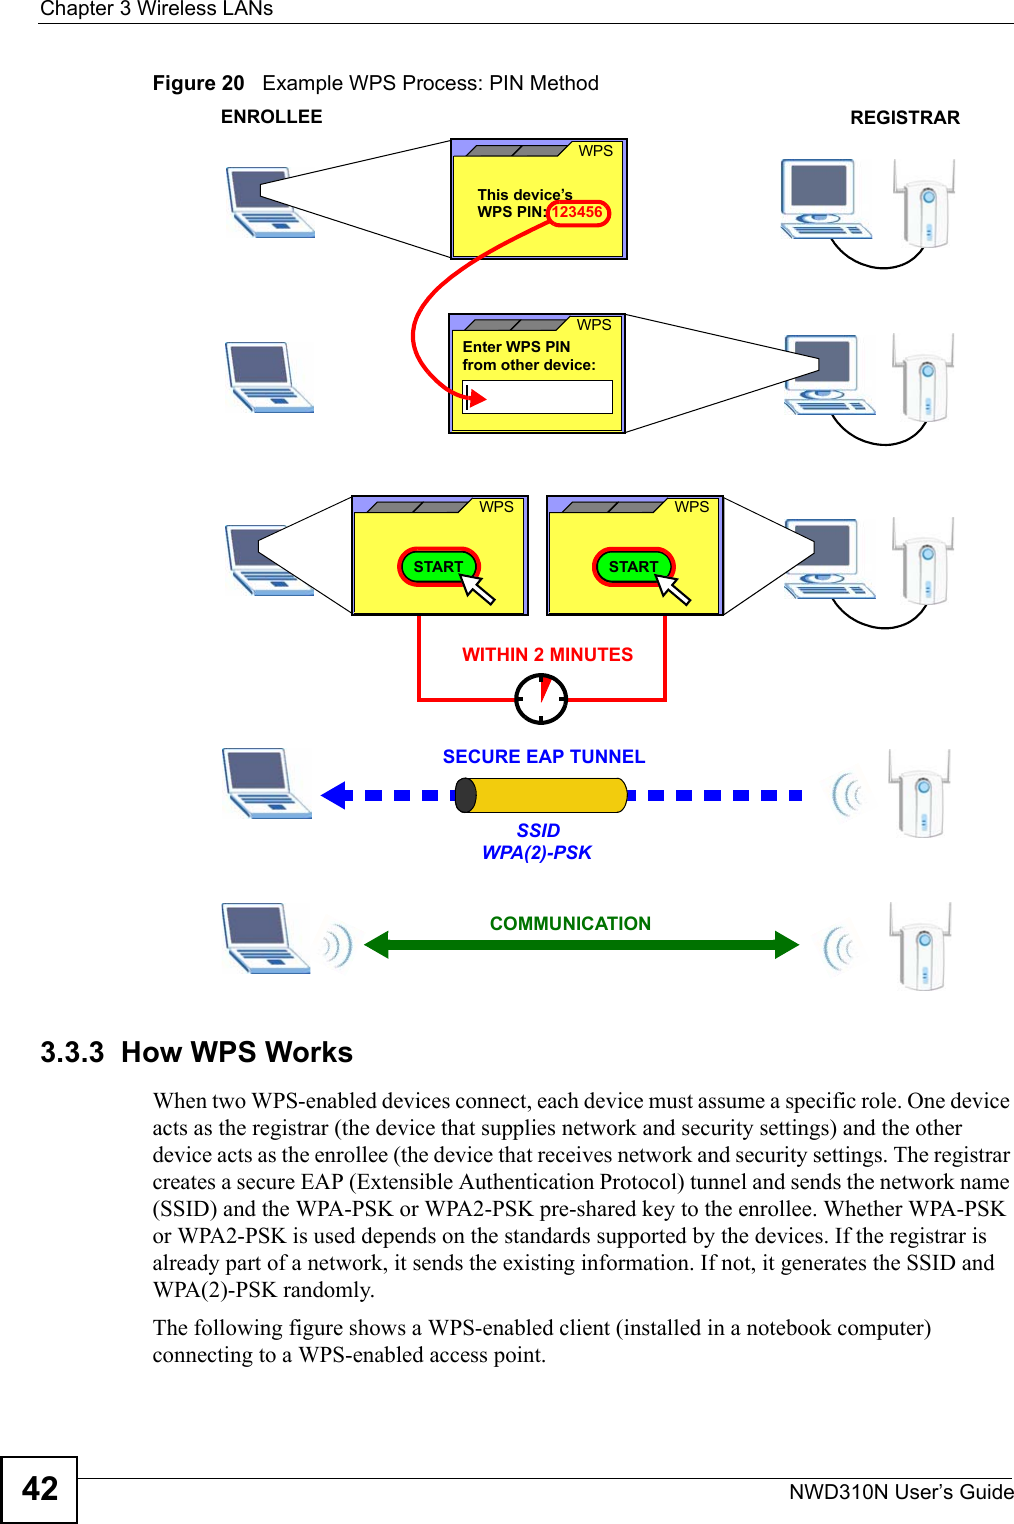 Chapter 3 Wireless LANsNWD310N User’s Guide42Figure 20   Example WPS Process: PIN Method3.3.3  How WPS WorksWhen two WPS-enabled devices connect, each device must assume a specific role. One device acts as the registrar (the device that supplies network and security settings) and the other device acts as the enrollee (the device that receives network and security settings. The registrar creates a secure EAP (Extensible Authentication Protocol) tunnel and sends the network name (SSID) and the WPA-PSK or WPA2-PSK pre-shared key to the enrollee. Whether WPA-PSK or WPA2-PSK is used depends on the standards supported by the devices. If the registrar is already part of a network, it sends the existing information. If not, it generates the SSID and WPA(2)-PSK randomly.The following figure shows a WPS-enabled client (installed in a notebook computer) connecting to a WPS-enabled access point.ENROLLEESECURE EAP TUNNELSSIDWPA(2)-PSKWITHIN 2 MINUTESCOMMUNICATIONThis device’s WPSEnter WPS PIN  WPSfrom other device: WPS PIN: 123456WPSSTARTWPSSTARTREGISTRAR